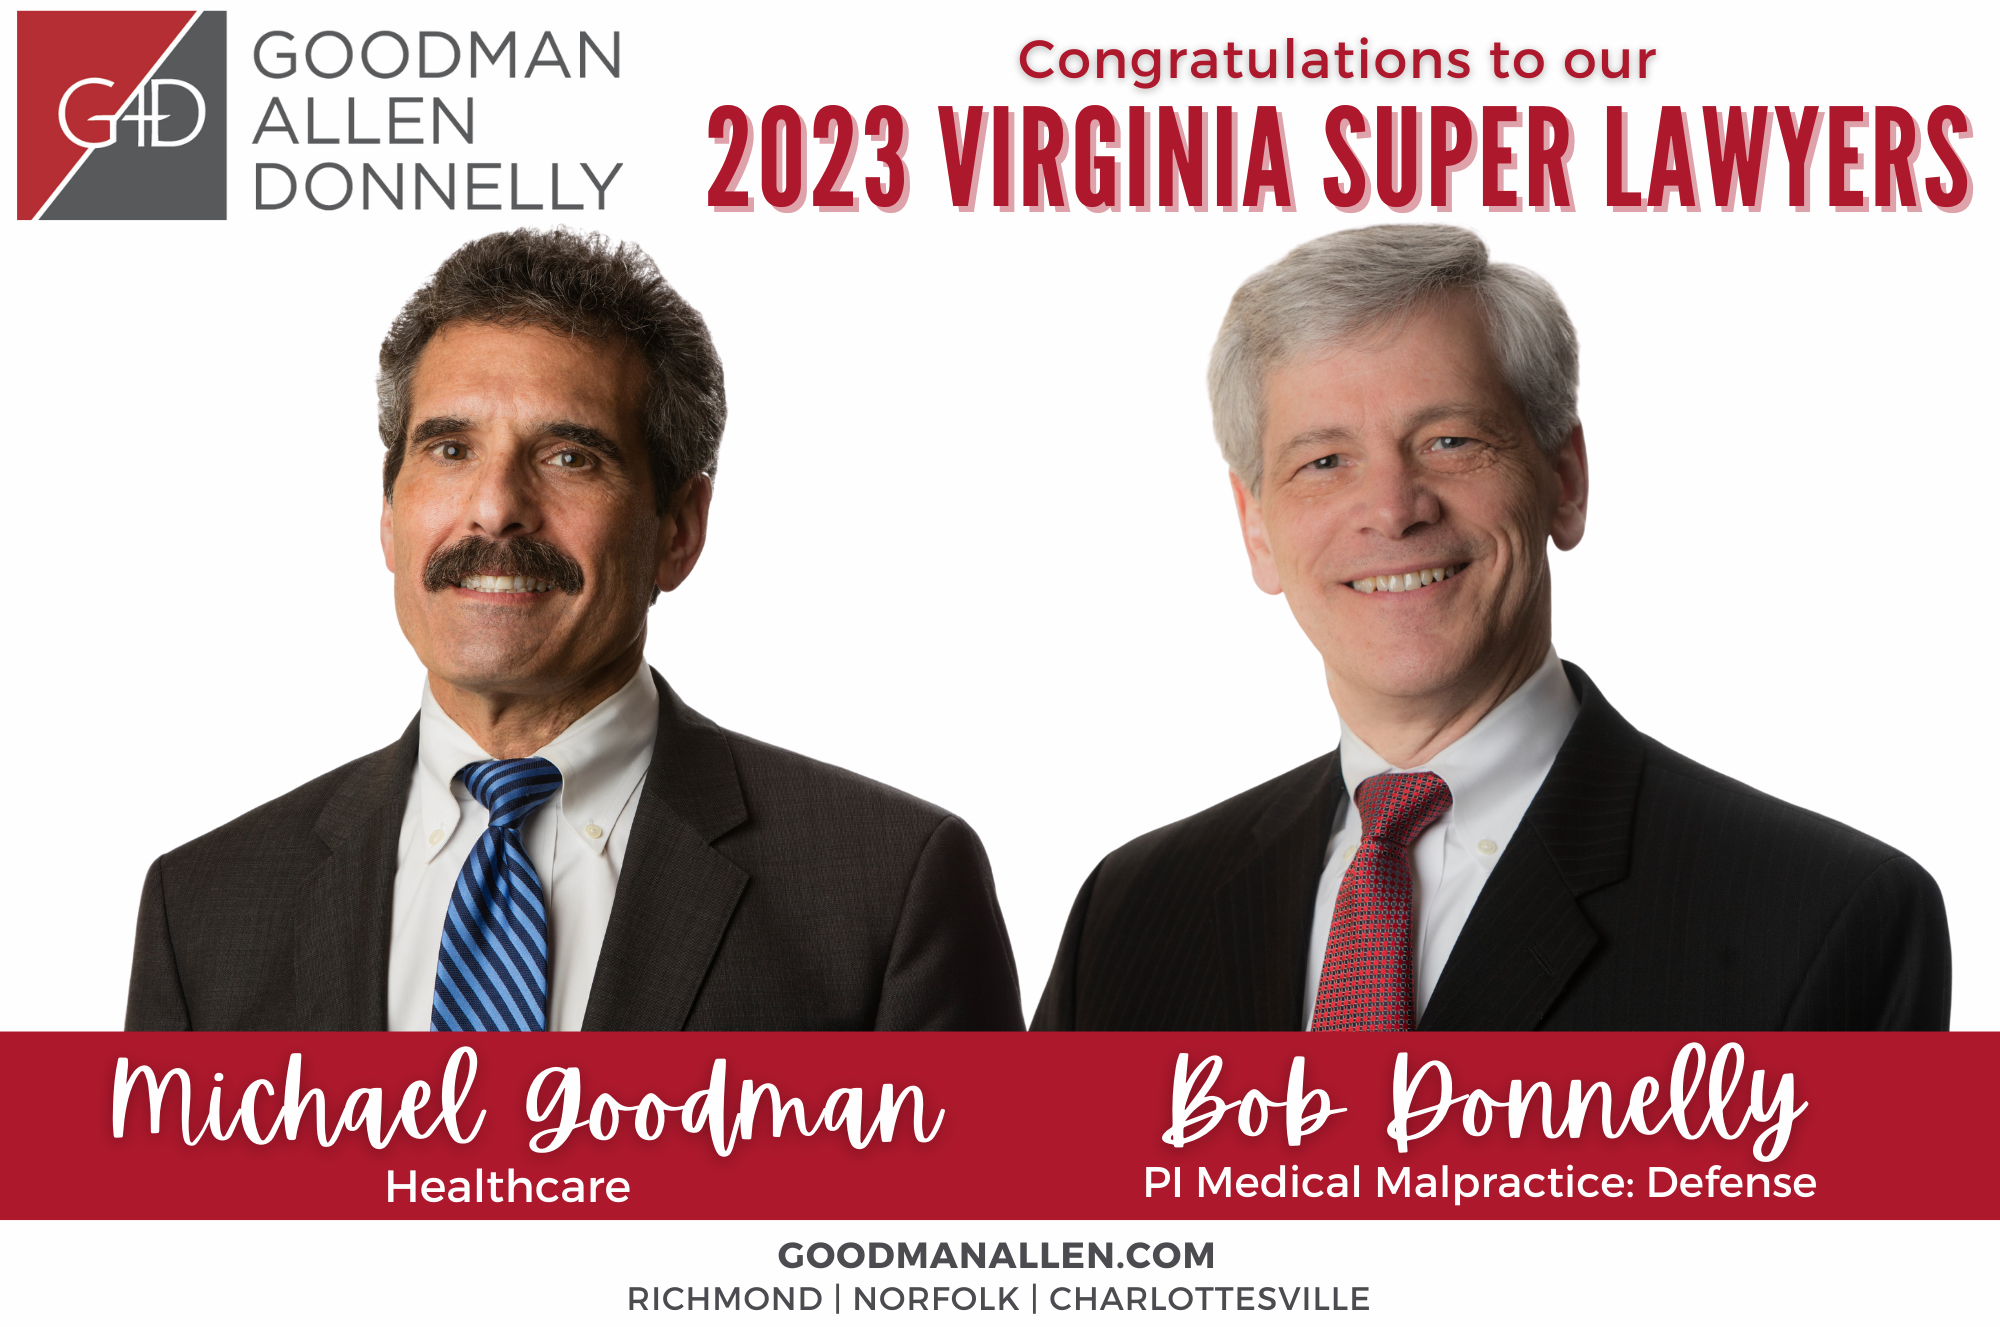 Bob Donnelly and Michael Goodman on Virginia Super Lawyers!